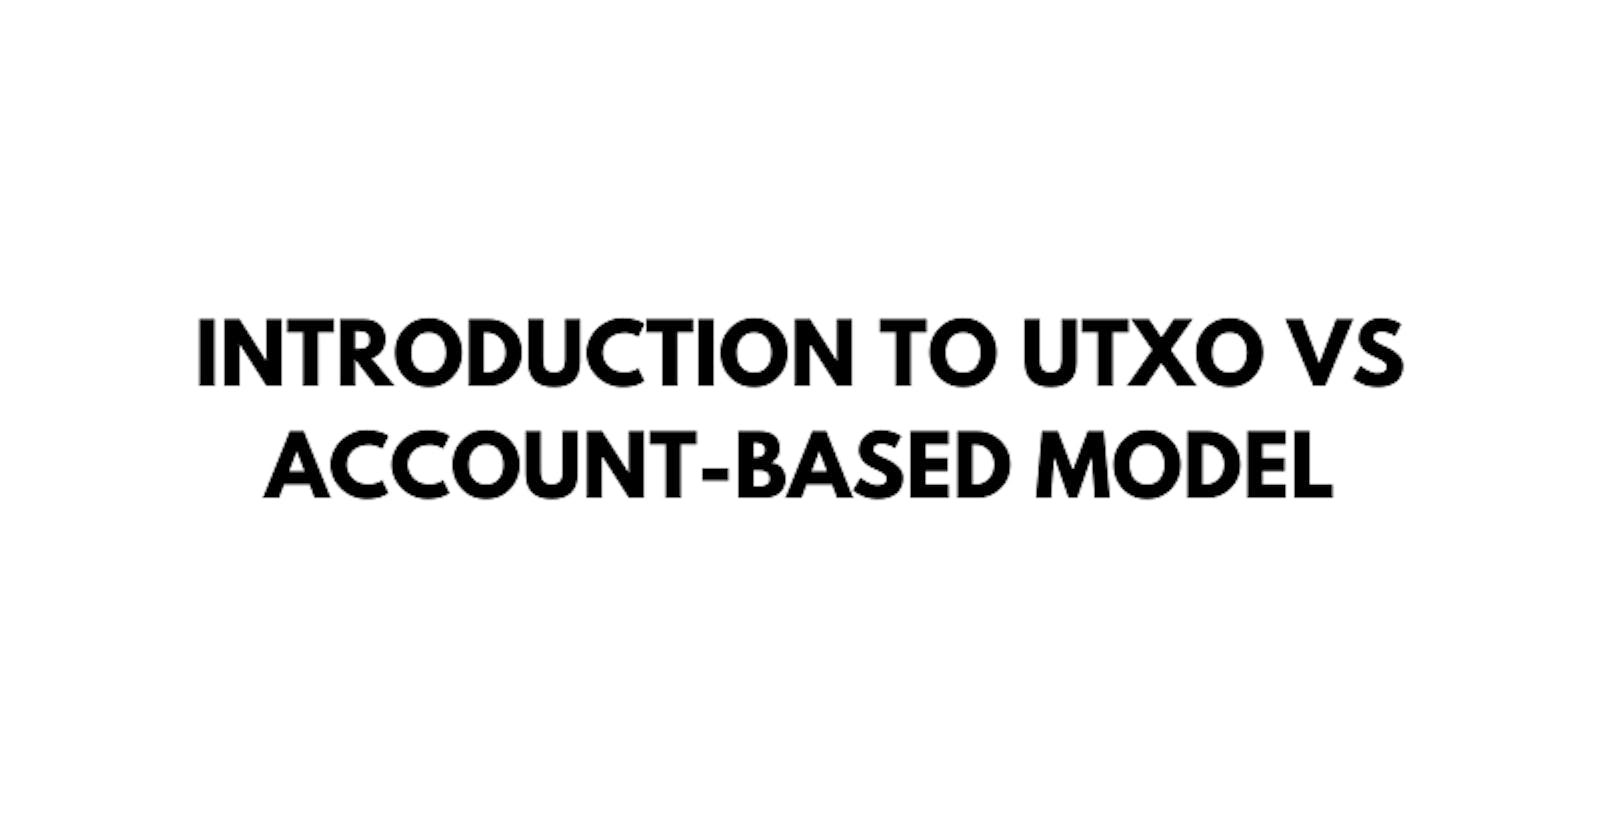 Introduction to UTXO vs Account-Based Model